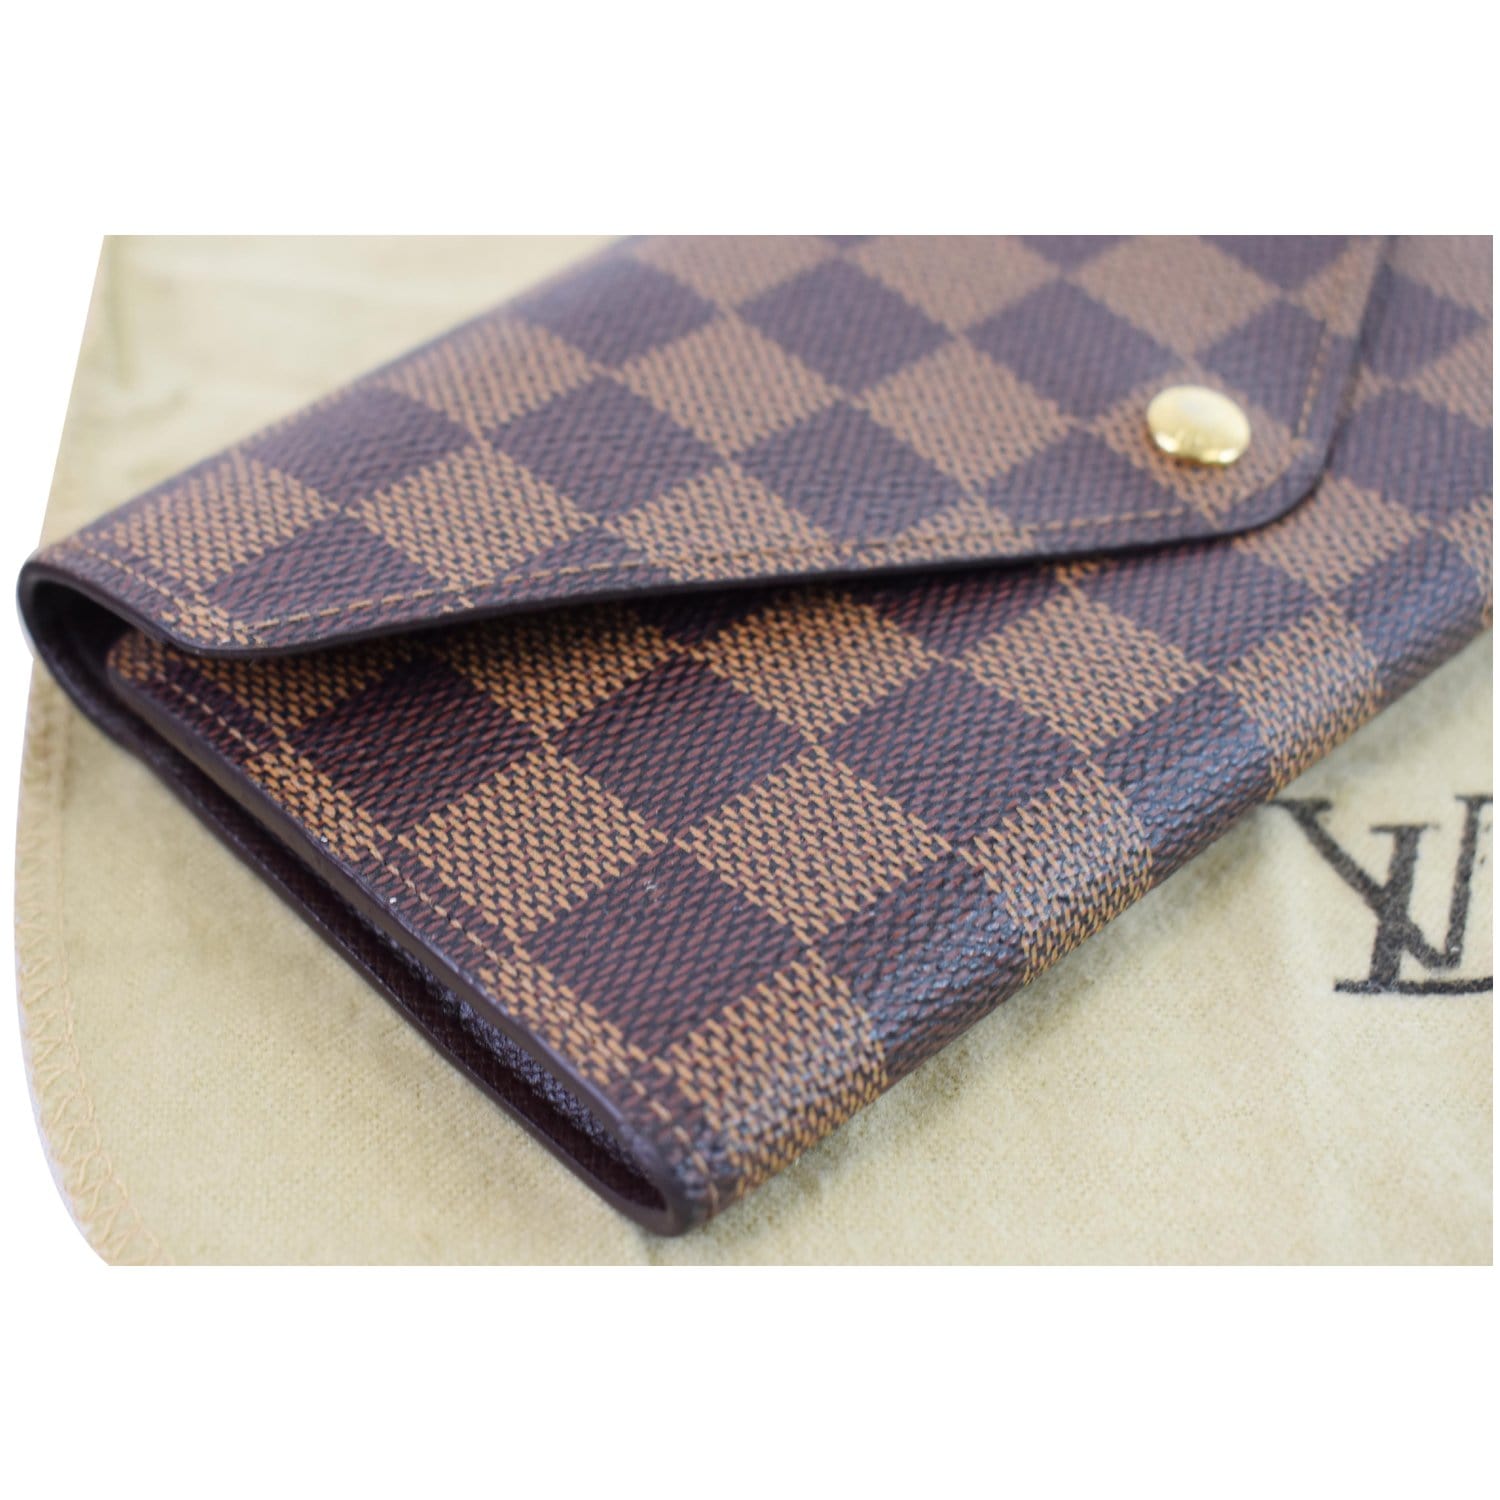 LV Josephine Wallet in Damier Ebene RM1,700. Chinese New Year is 28th  January 2017. We have special deliveries. WhatsApp…